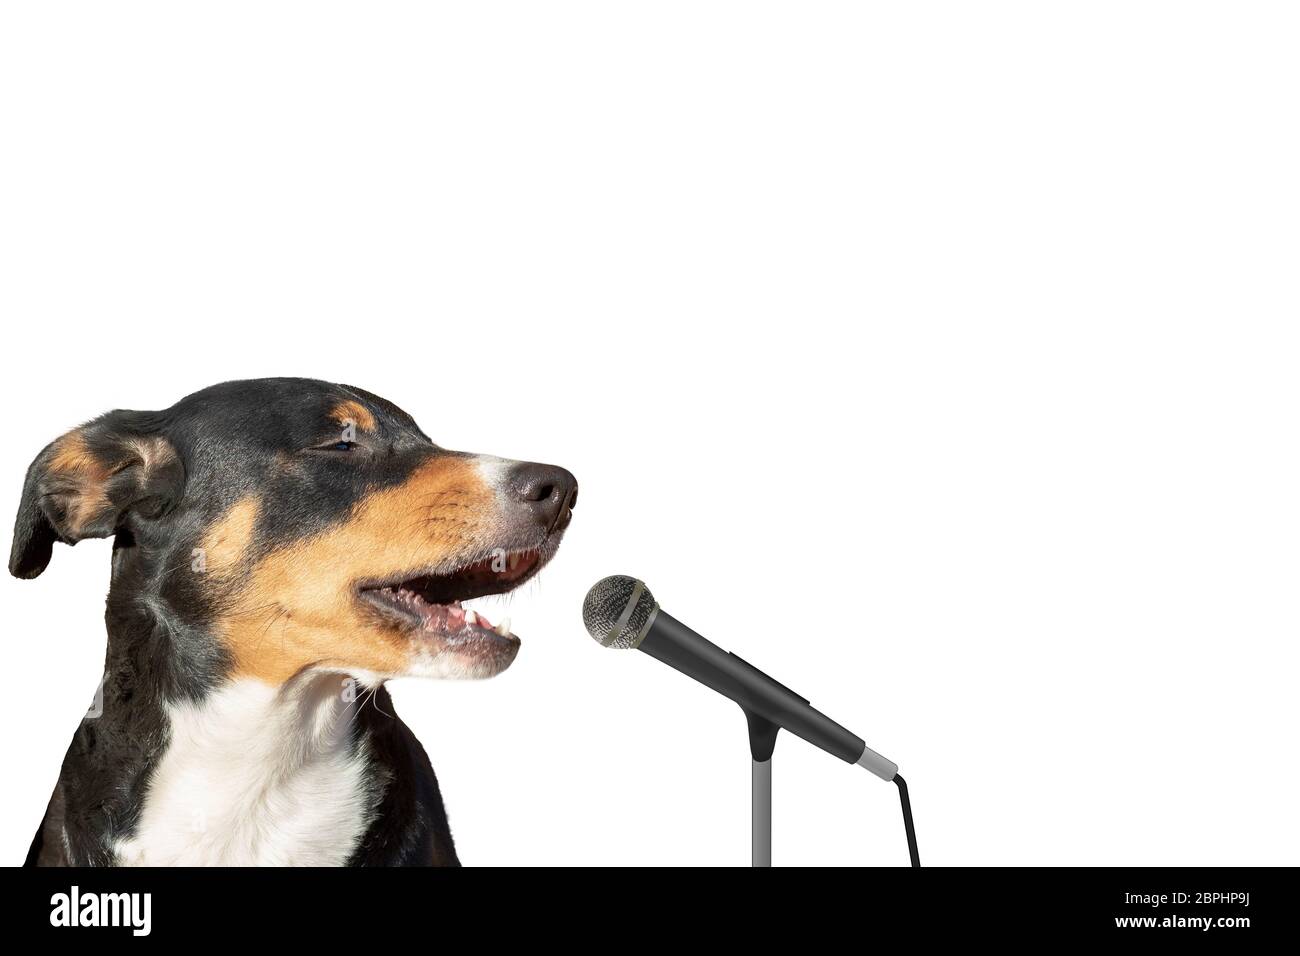 Appenzeller mountain dog isolated on white background singing with microphone Stock Photo